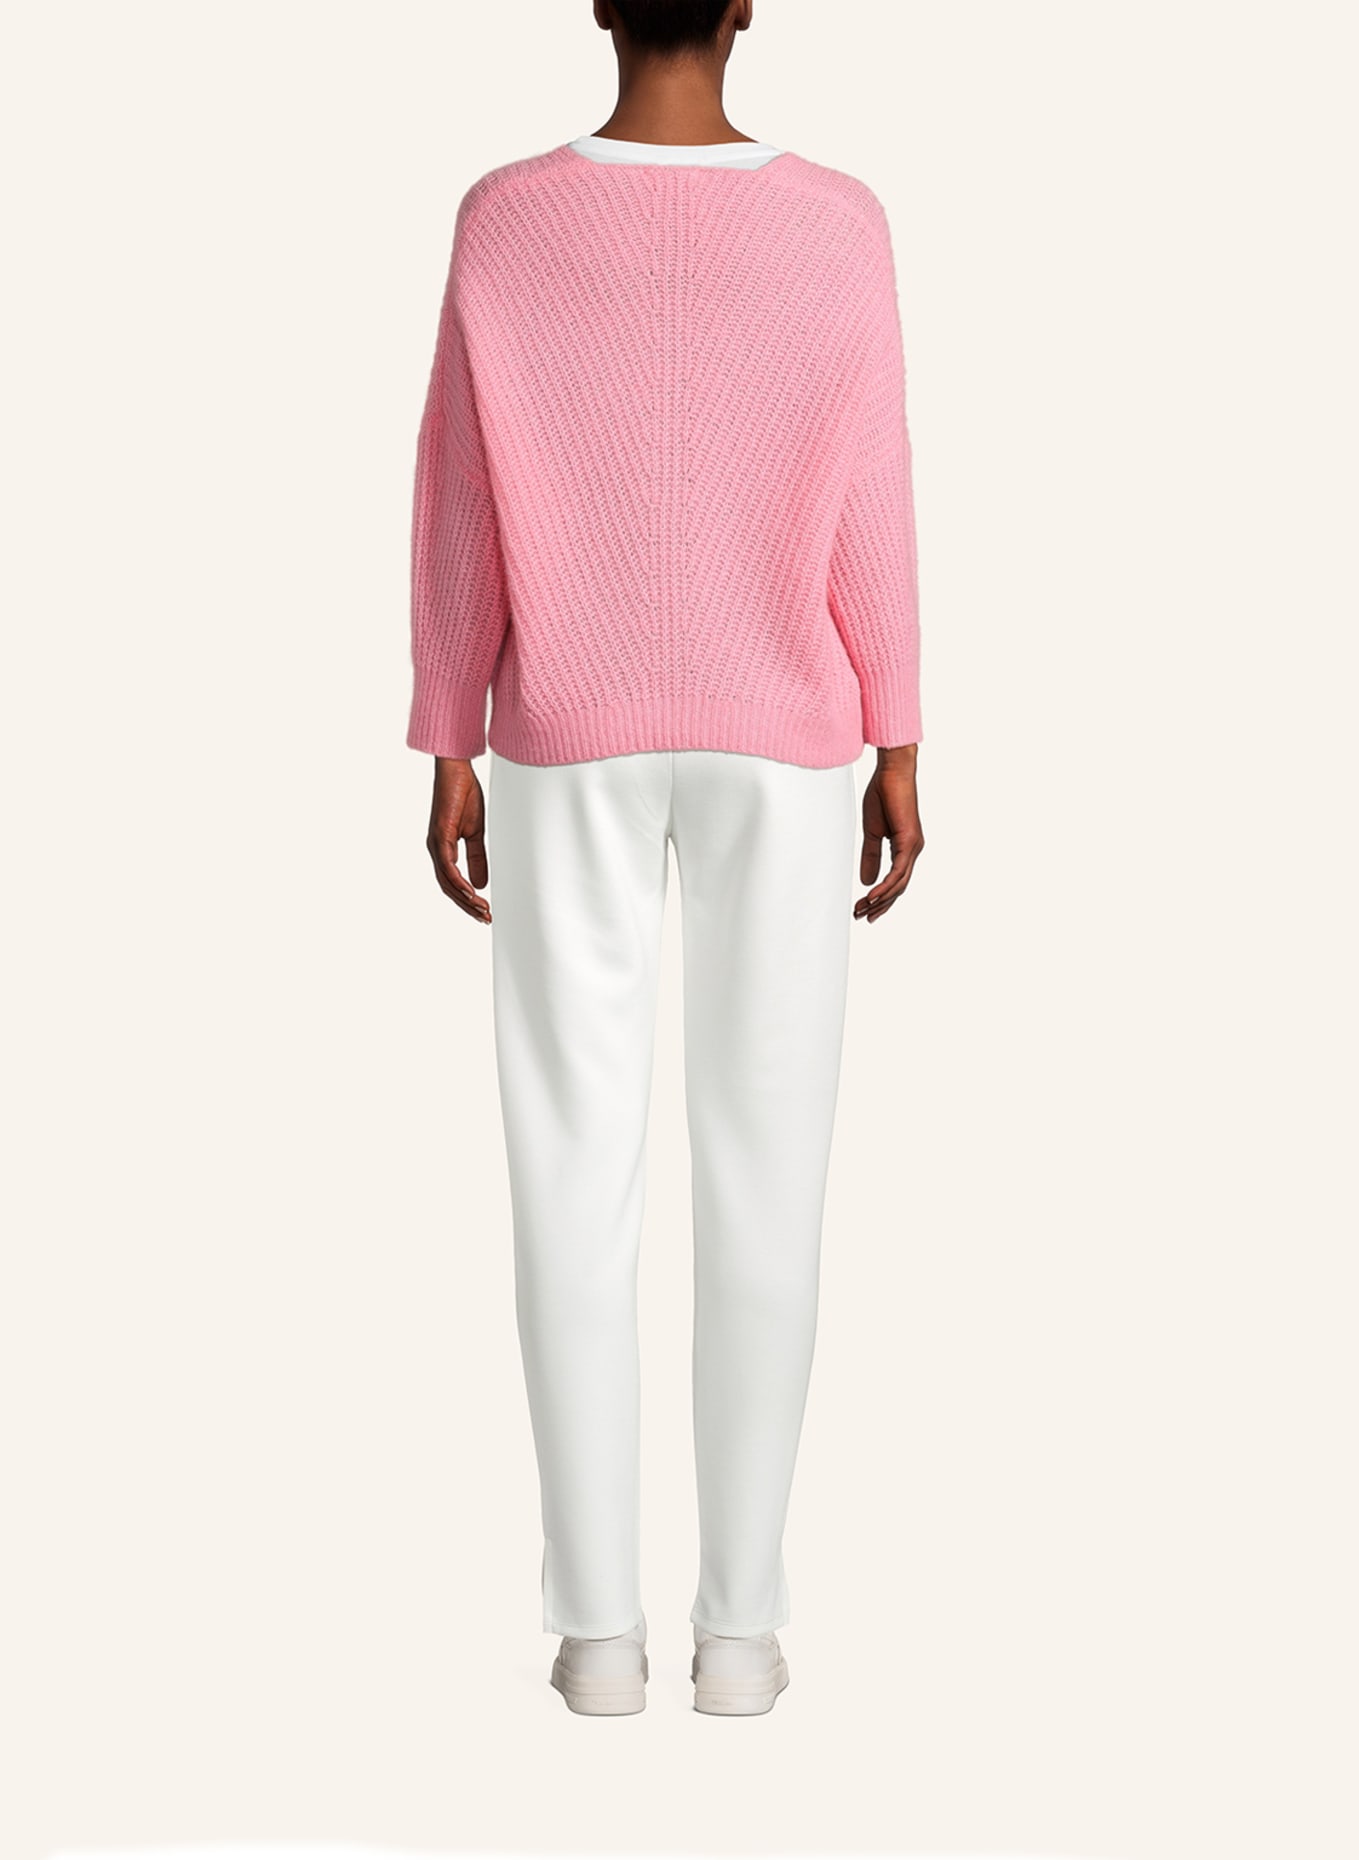 Princess GOES HOLLYWOOD Pullover mit Cashmere, Farbe: PINK (Bild 2)